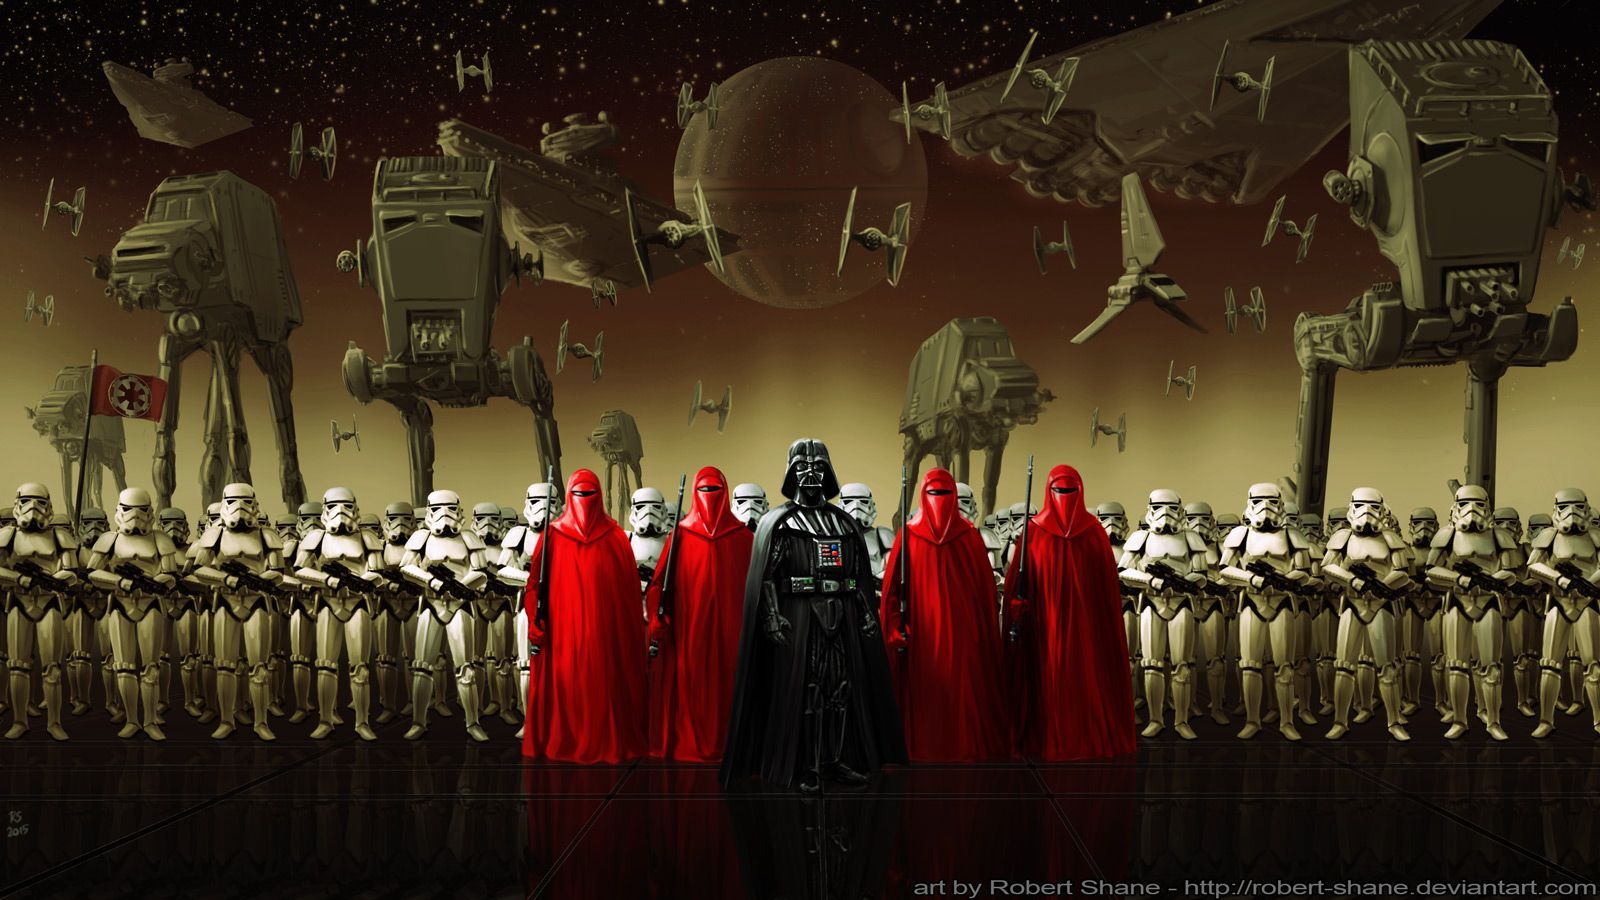 The Imperial Army [1600×900]. • R Wallpaper. Star Wars Awesome, Star Wars Image, Star Wars Empire